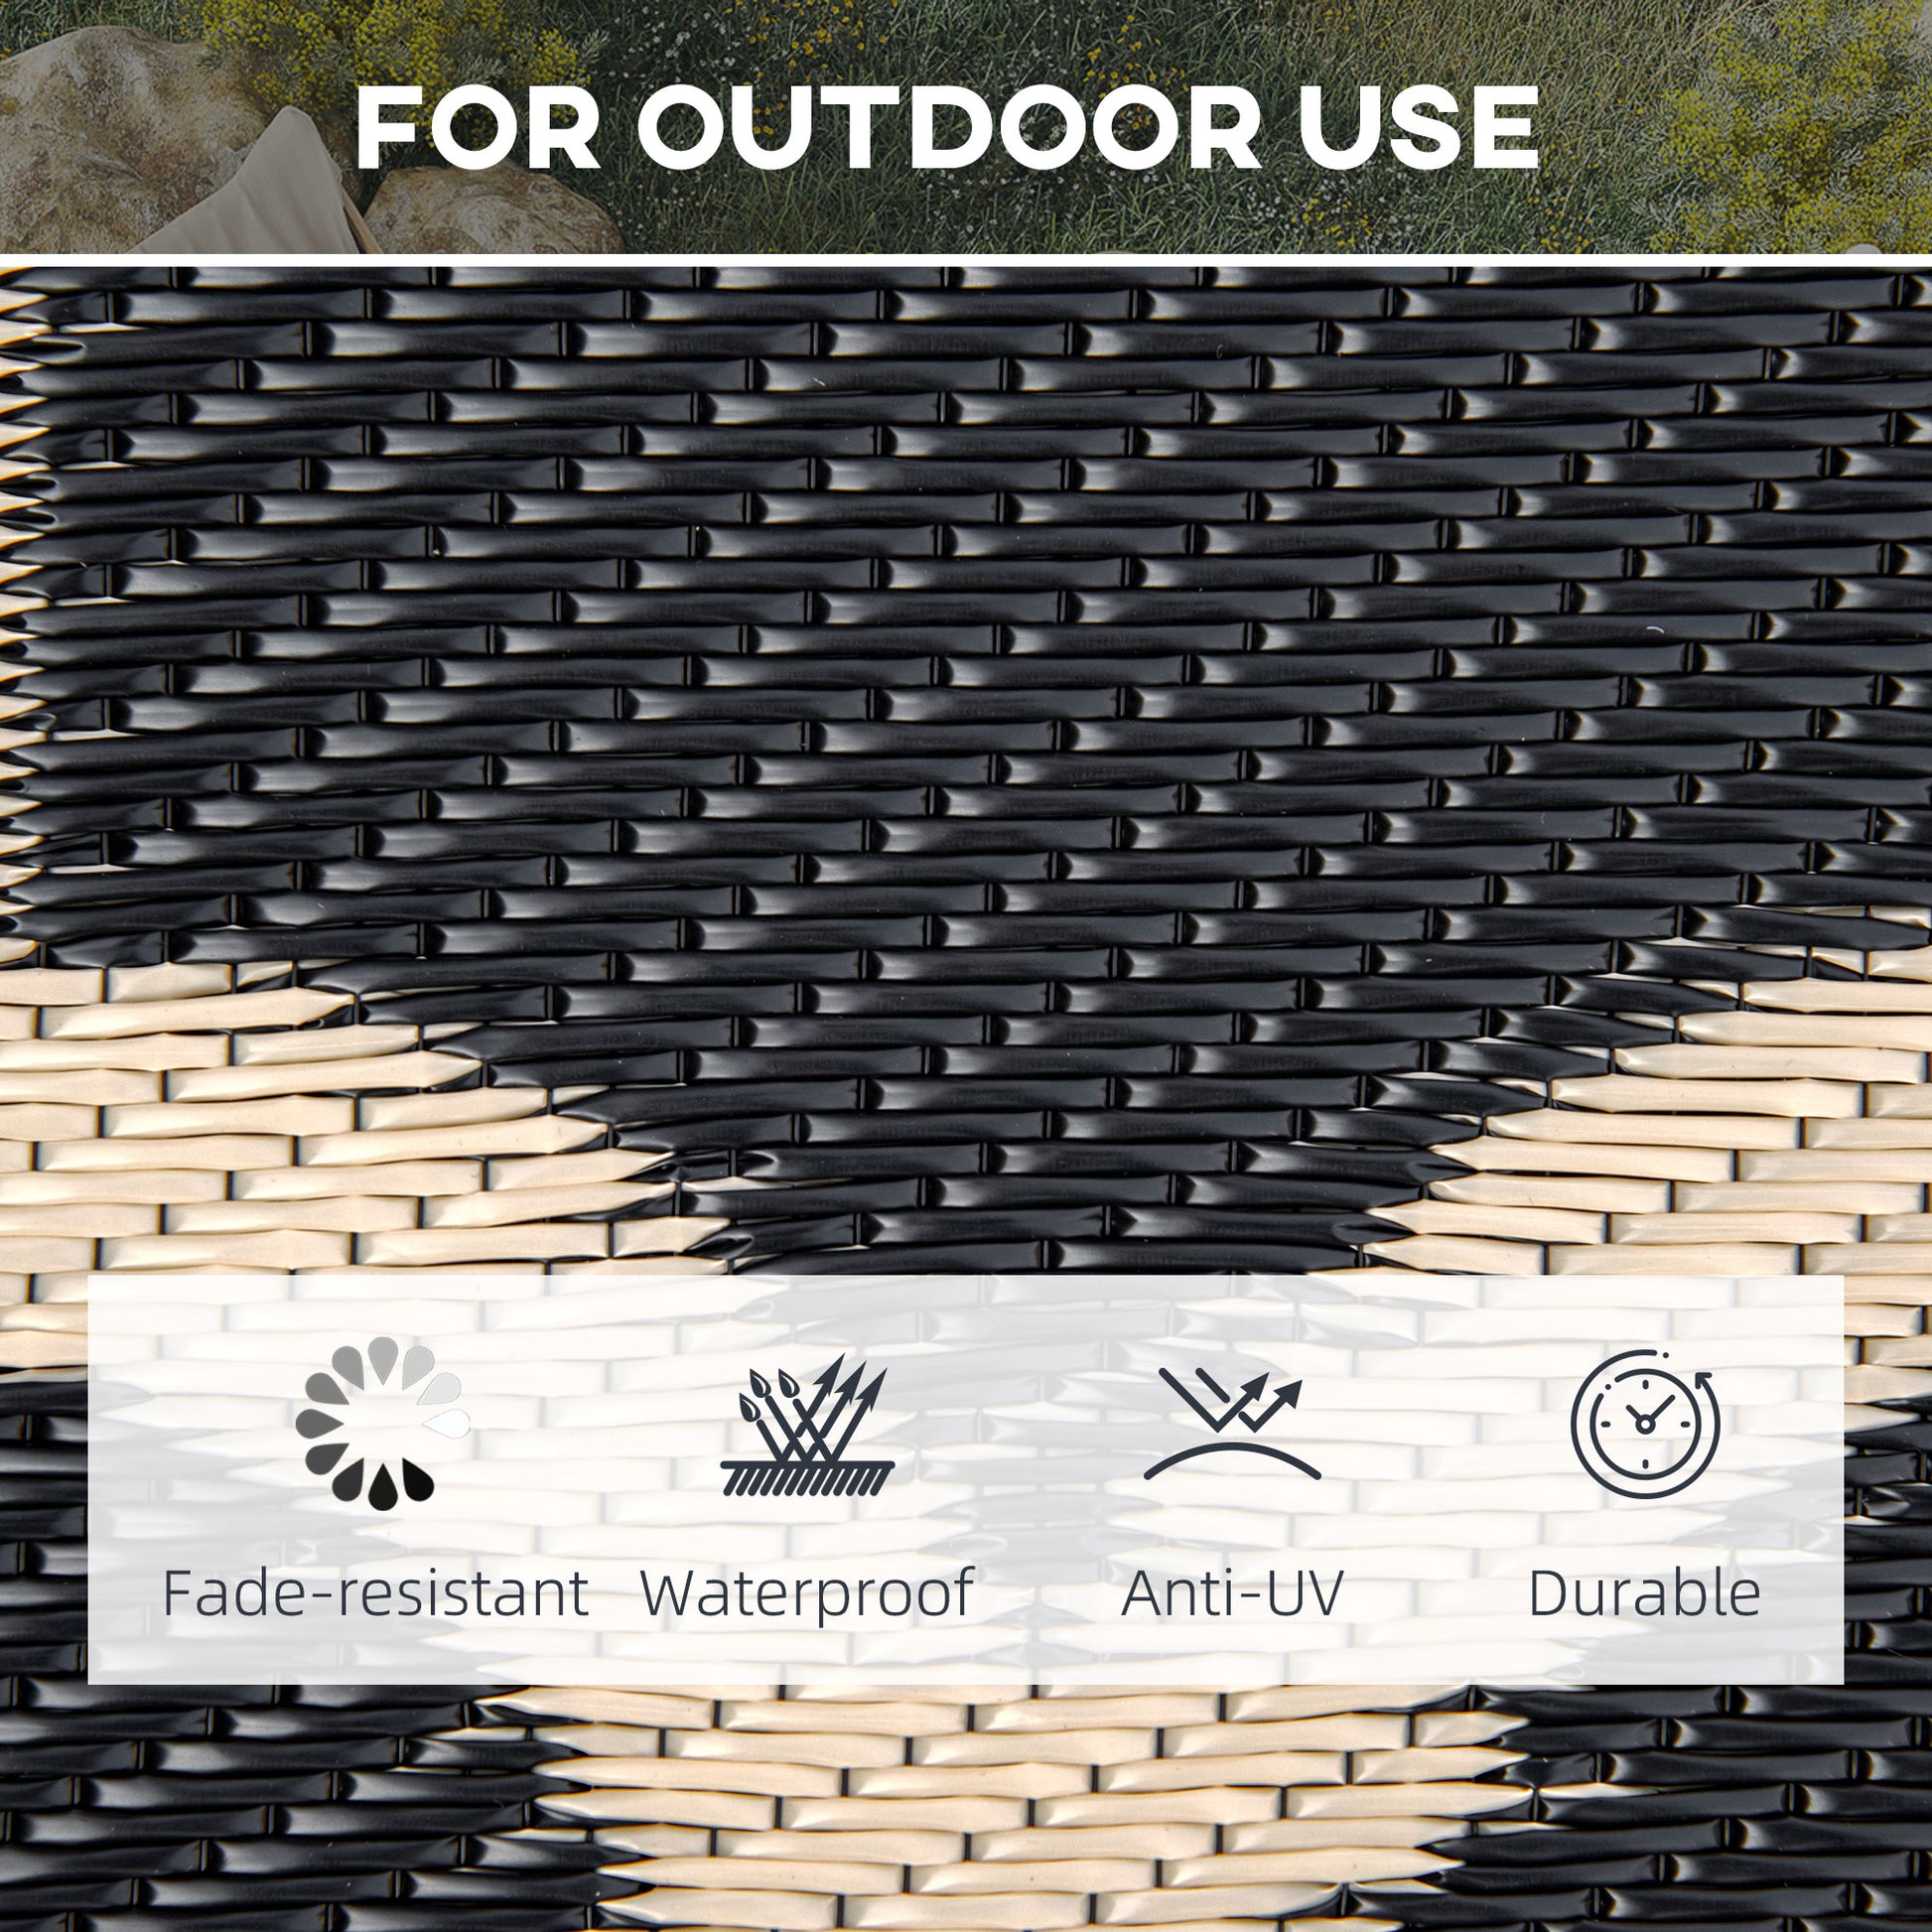 9'x12' Reversible Outdoor RV Rug, Patio Floor Mat, Plastic Straw Rug for Backyard, Deck, Beach, Camping, Black at Gallery Canada